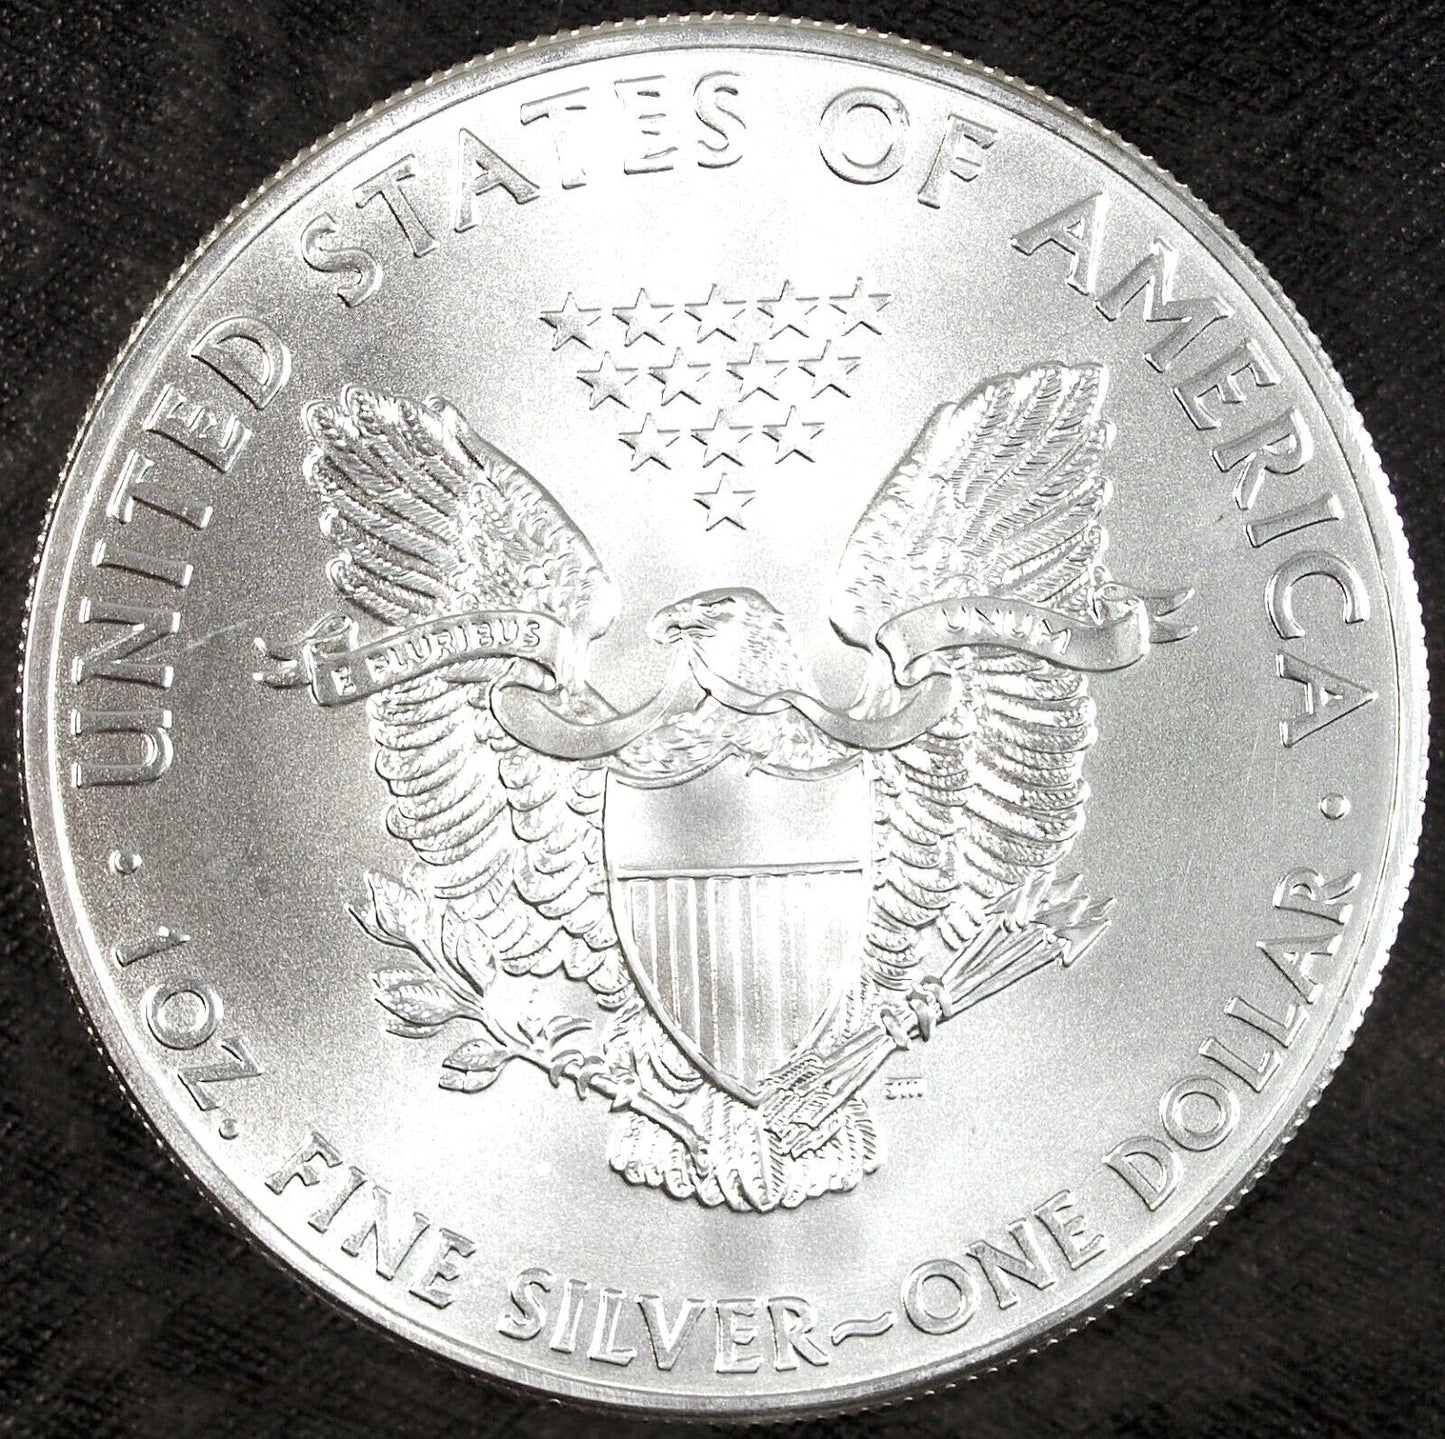 2014 American Silver Eagle ☆☆ Uncirculated ☆☆ Great Collectible 220